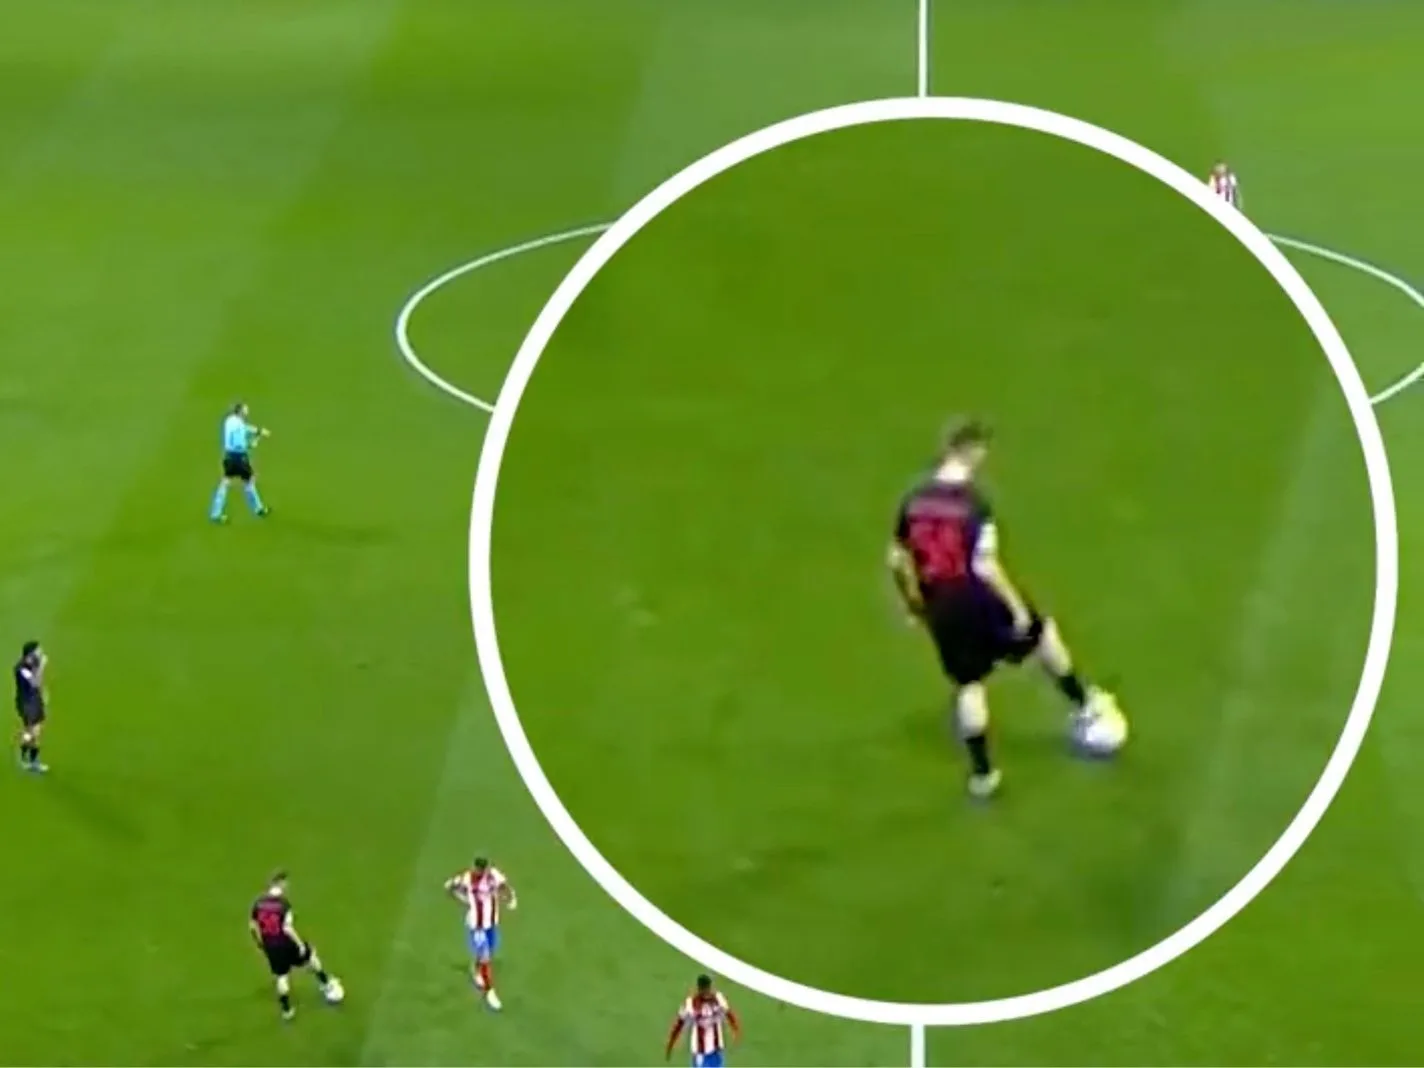 The slick ball control from Alexis Saelemaekers that has got football fans dumbfounded